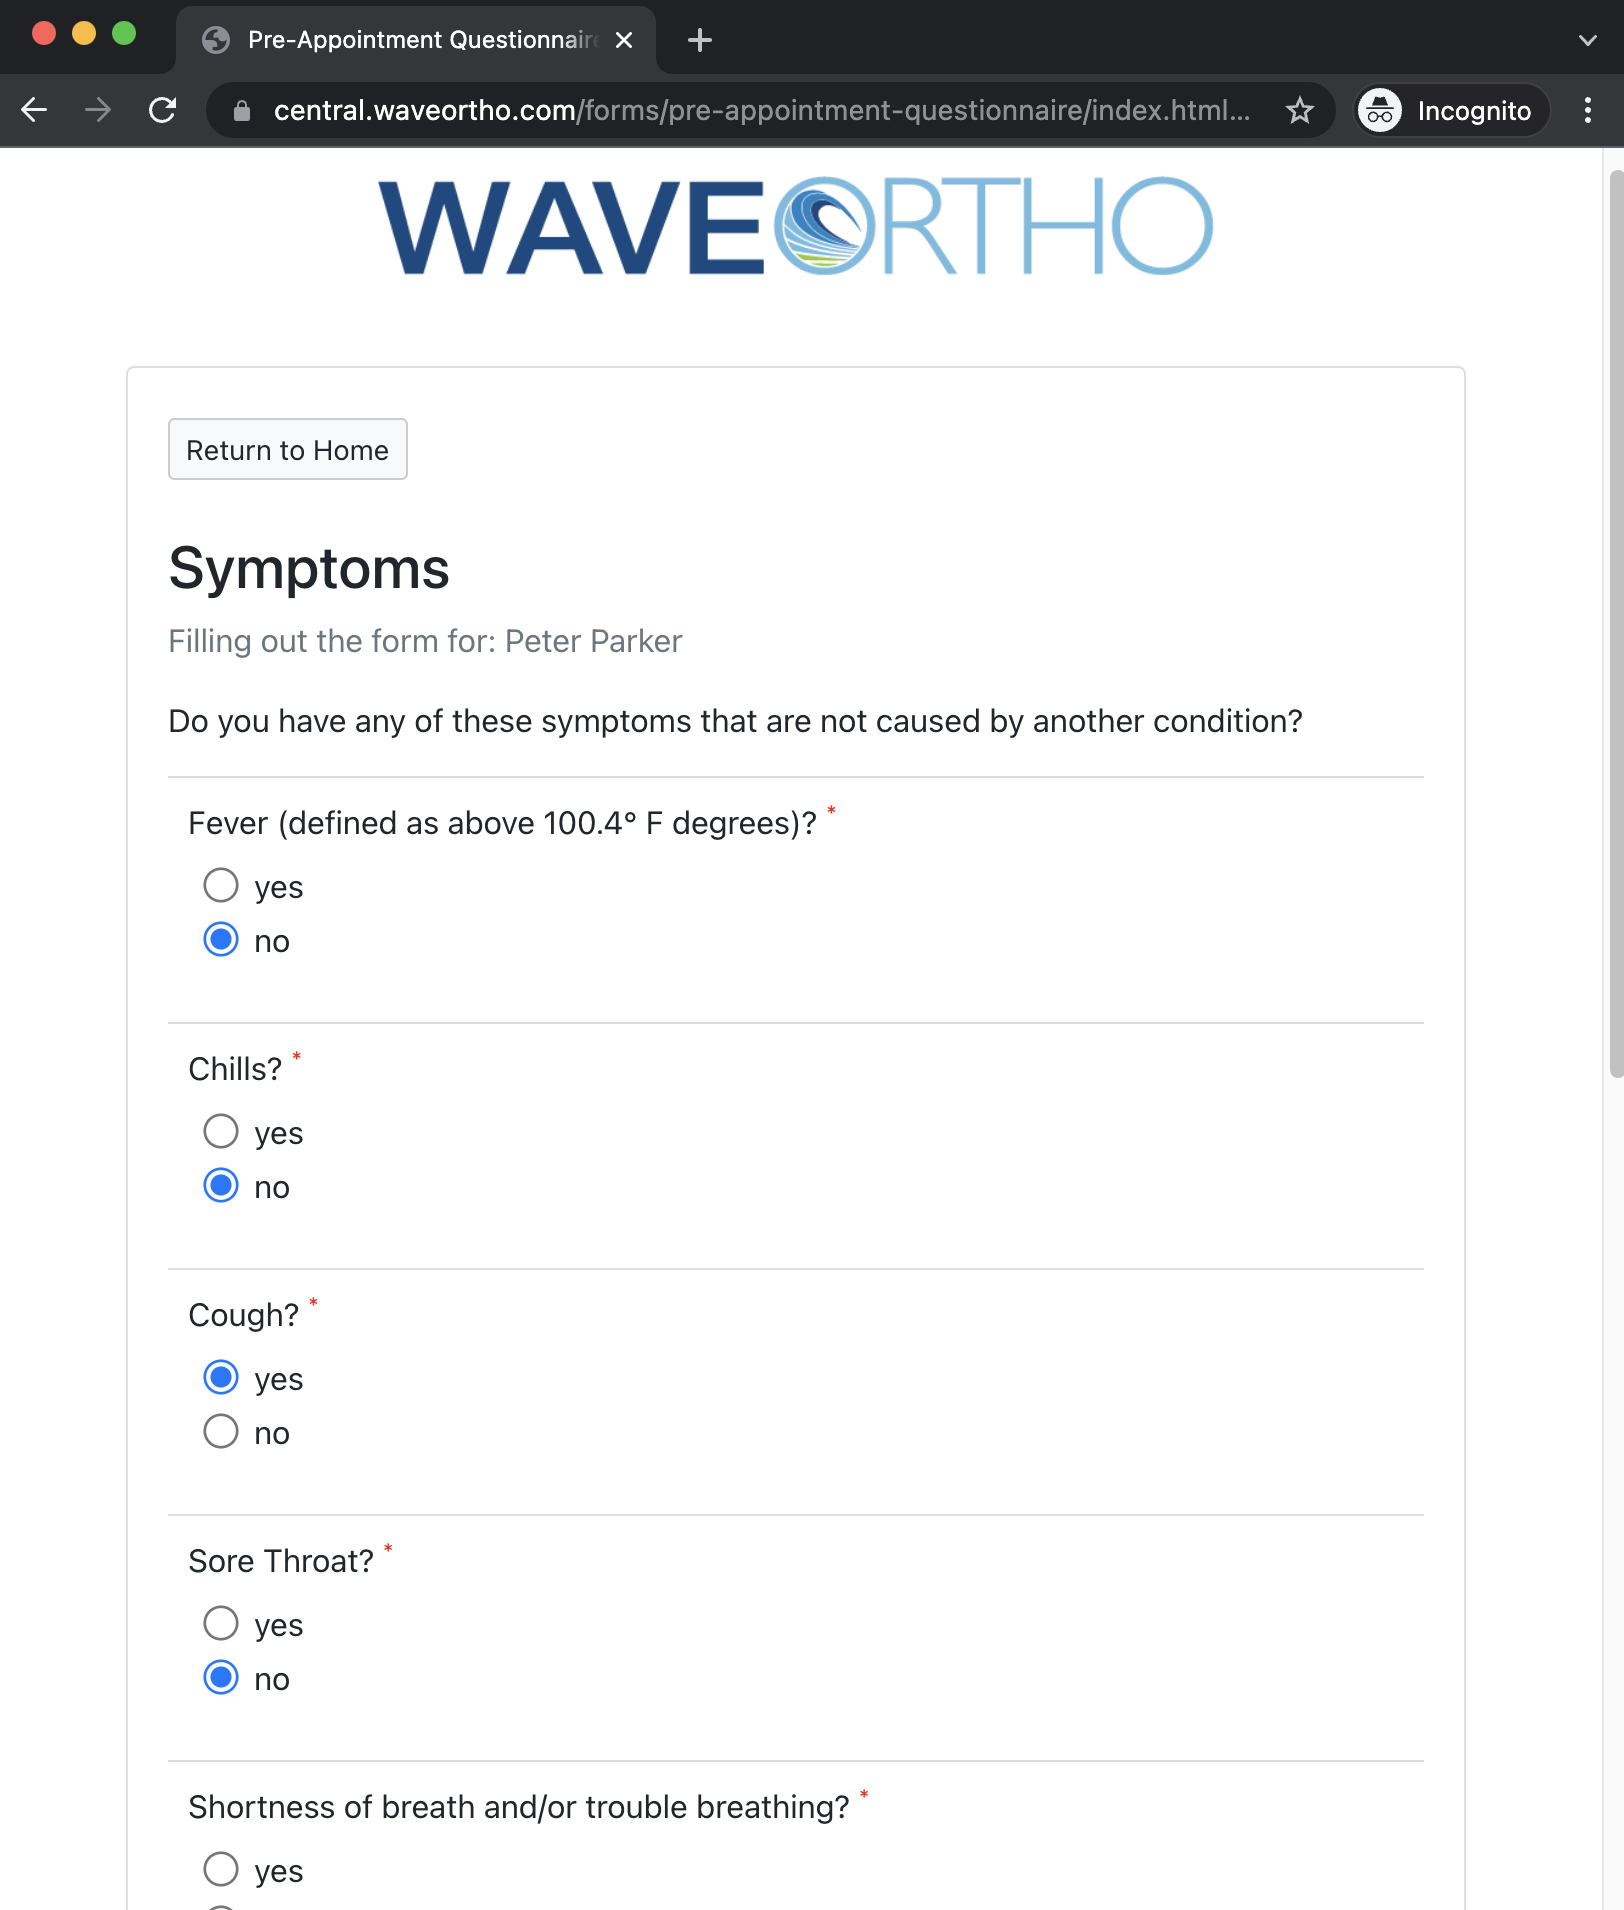 A browser-screenshot of a questionnaire being filled out, asking about the patient's recent symptoms